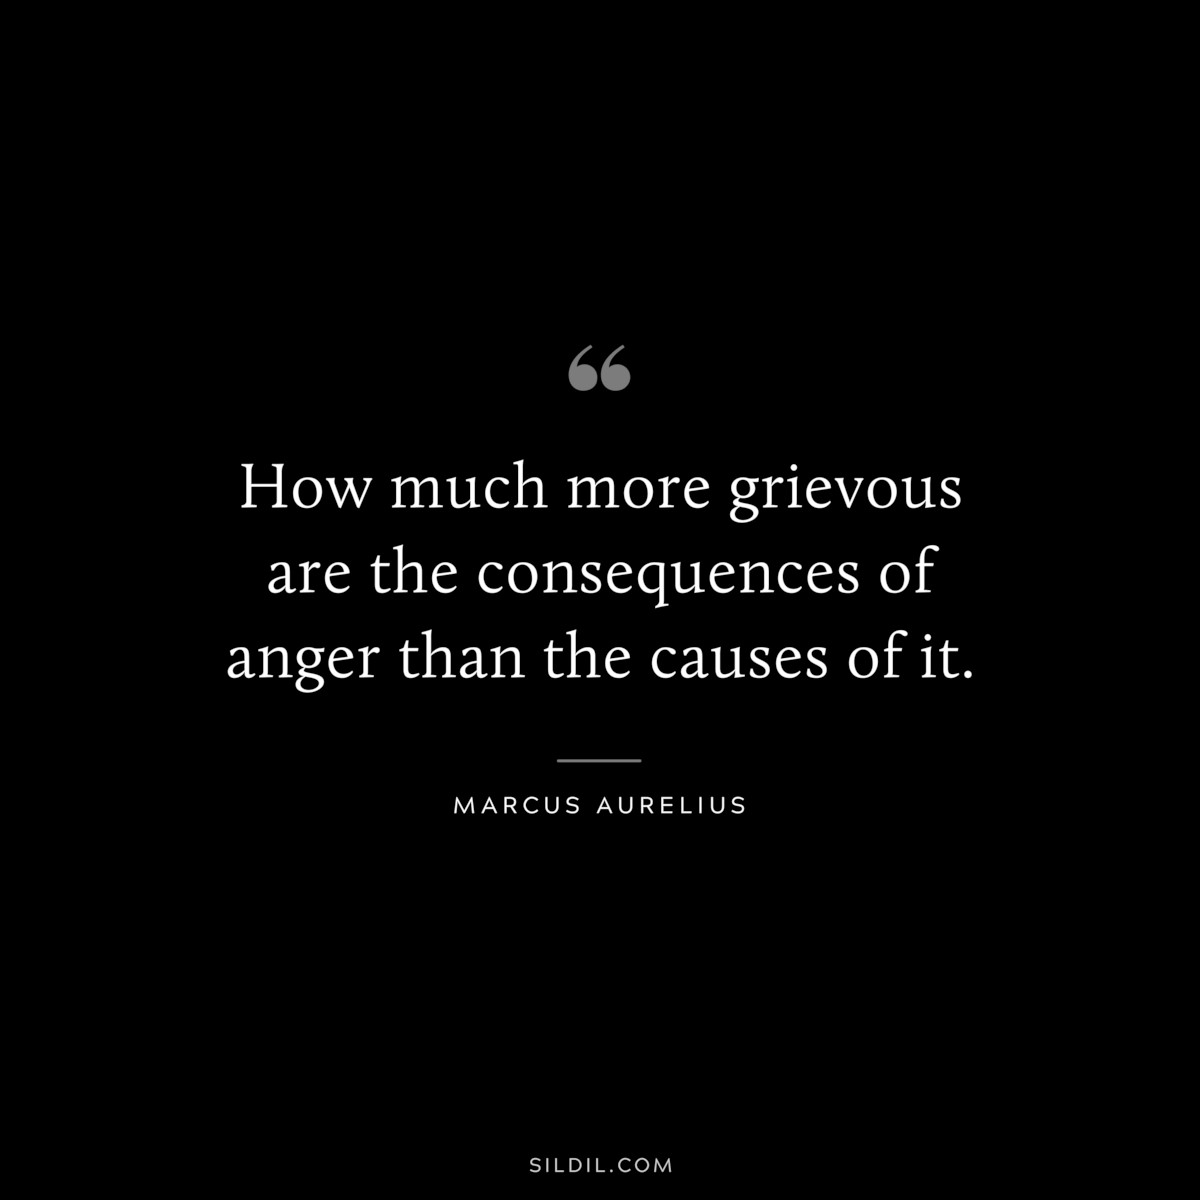 How much more grievous are the consequences of anger than the causes of it. ― Marcus Aurelius